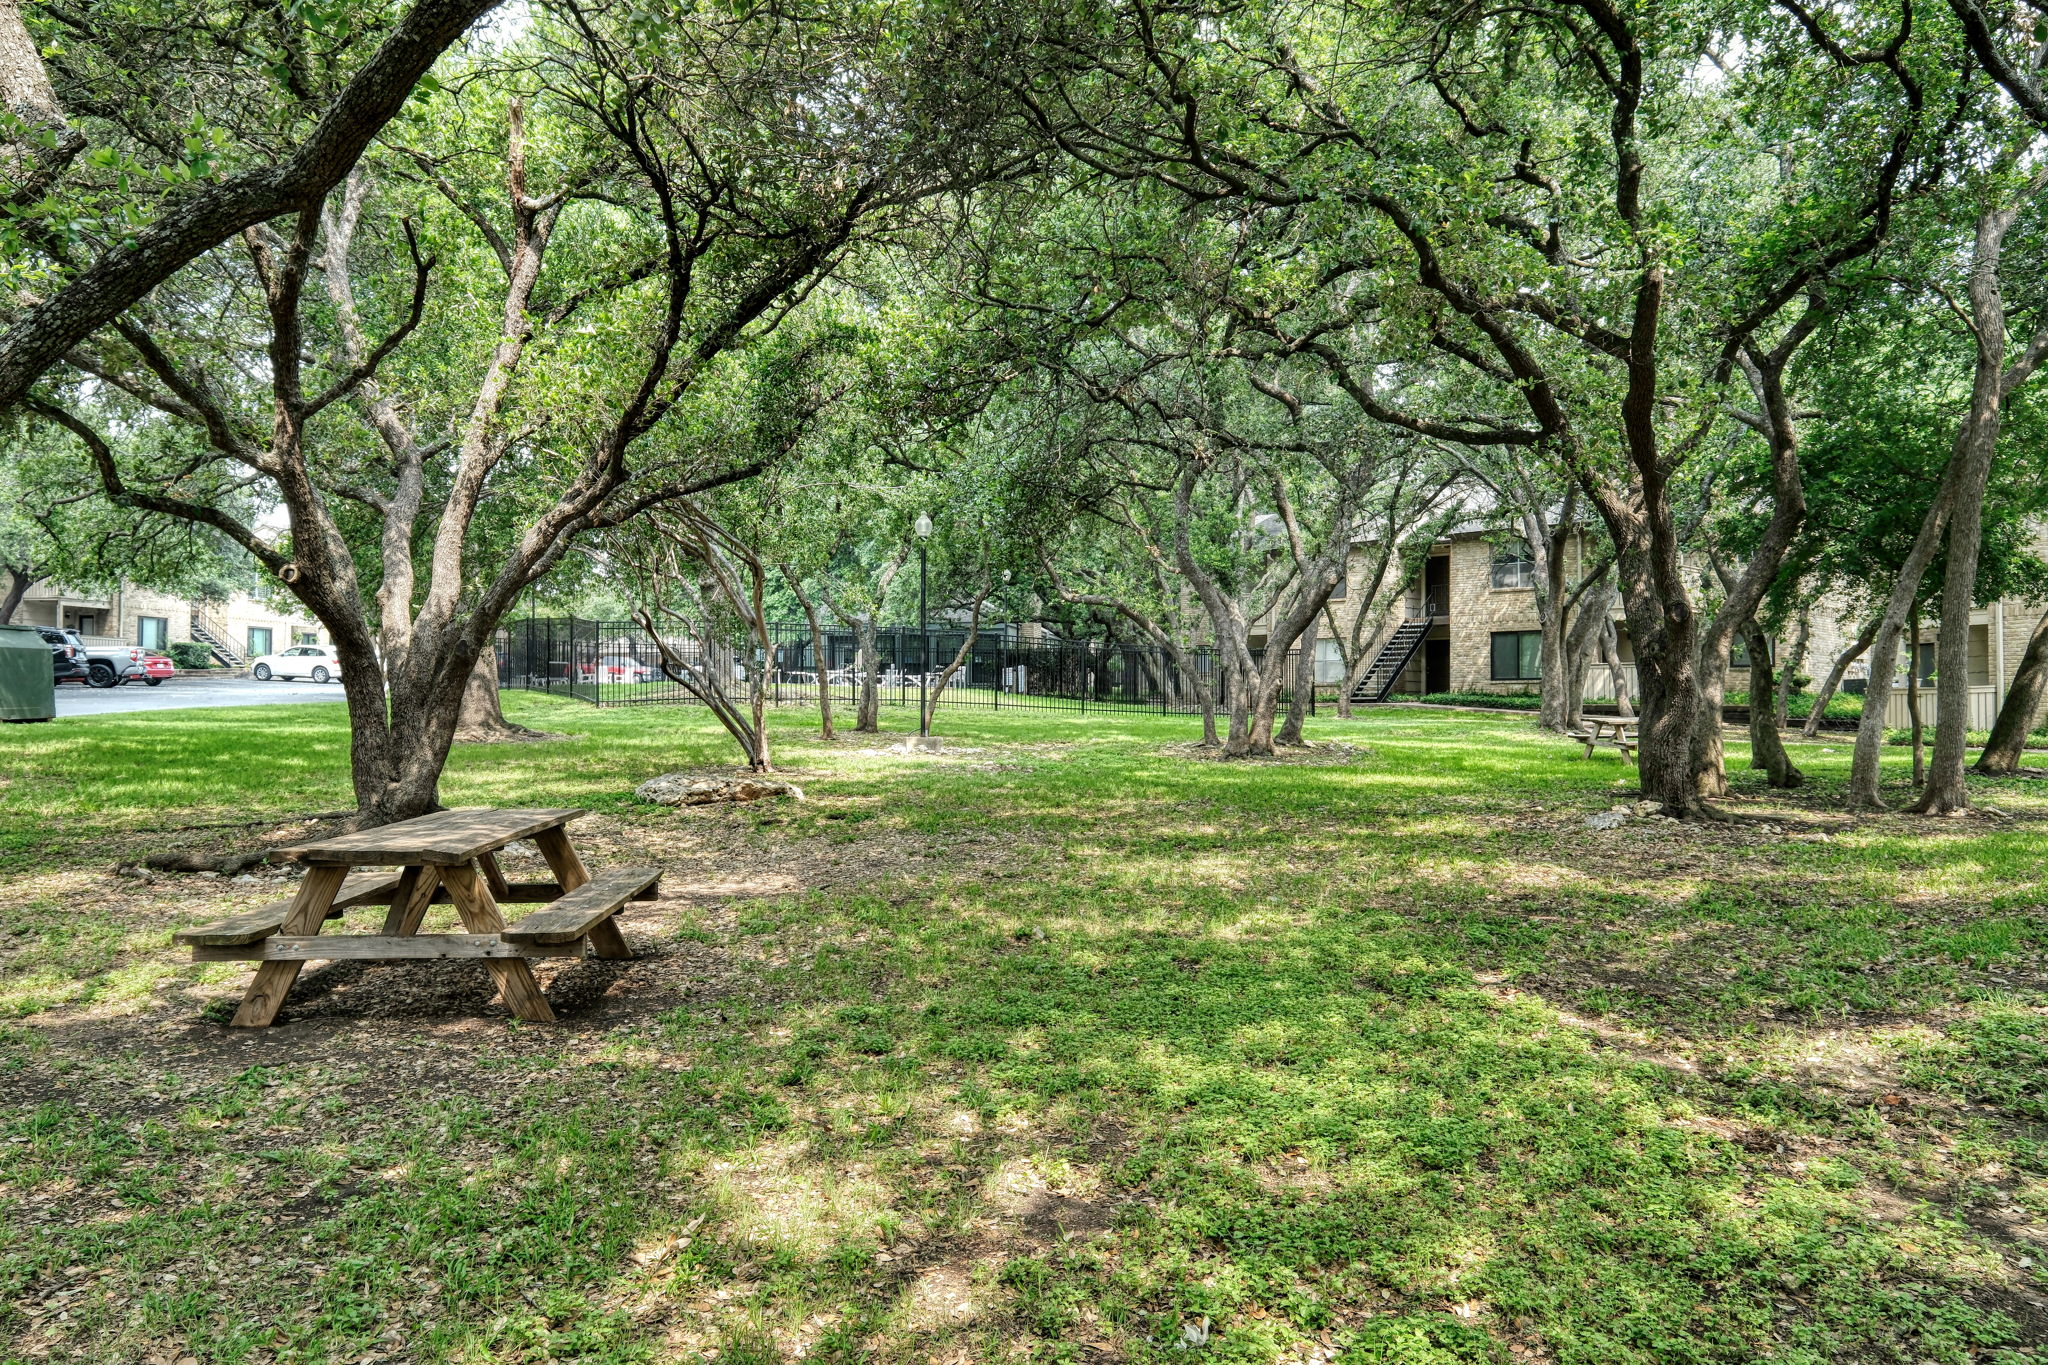 Green Area and Picnic Tables